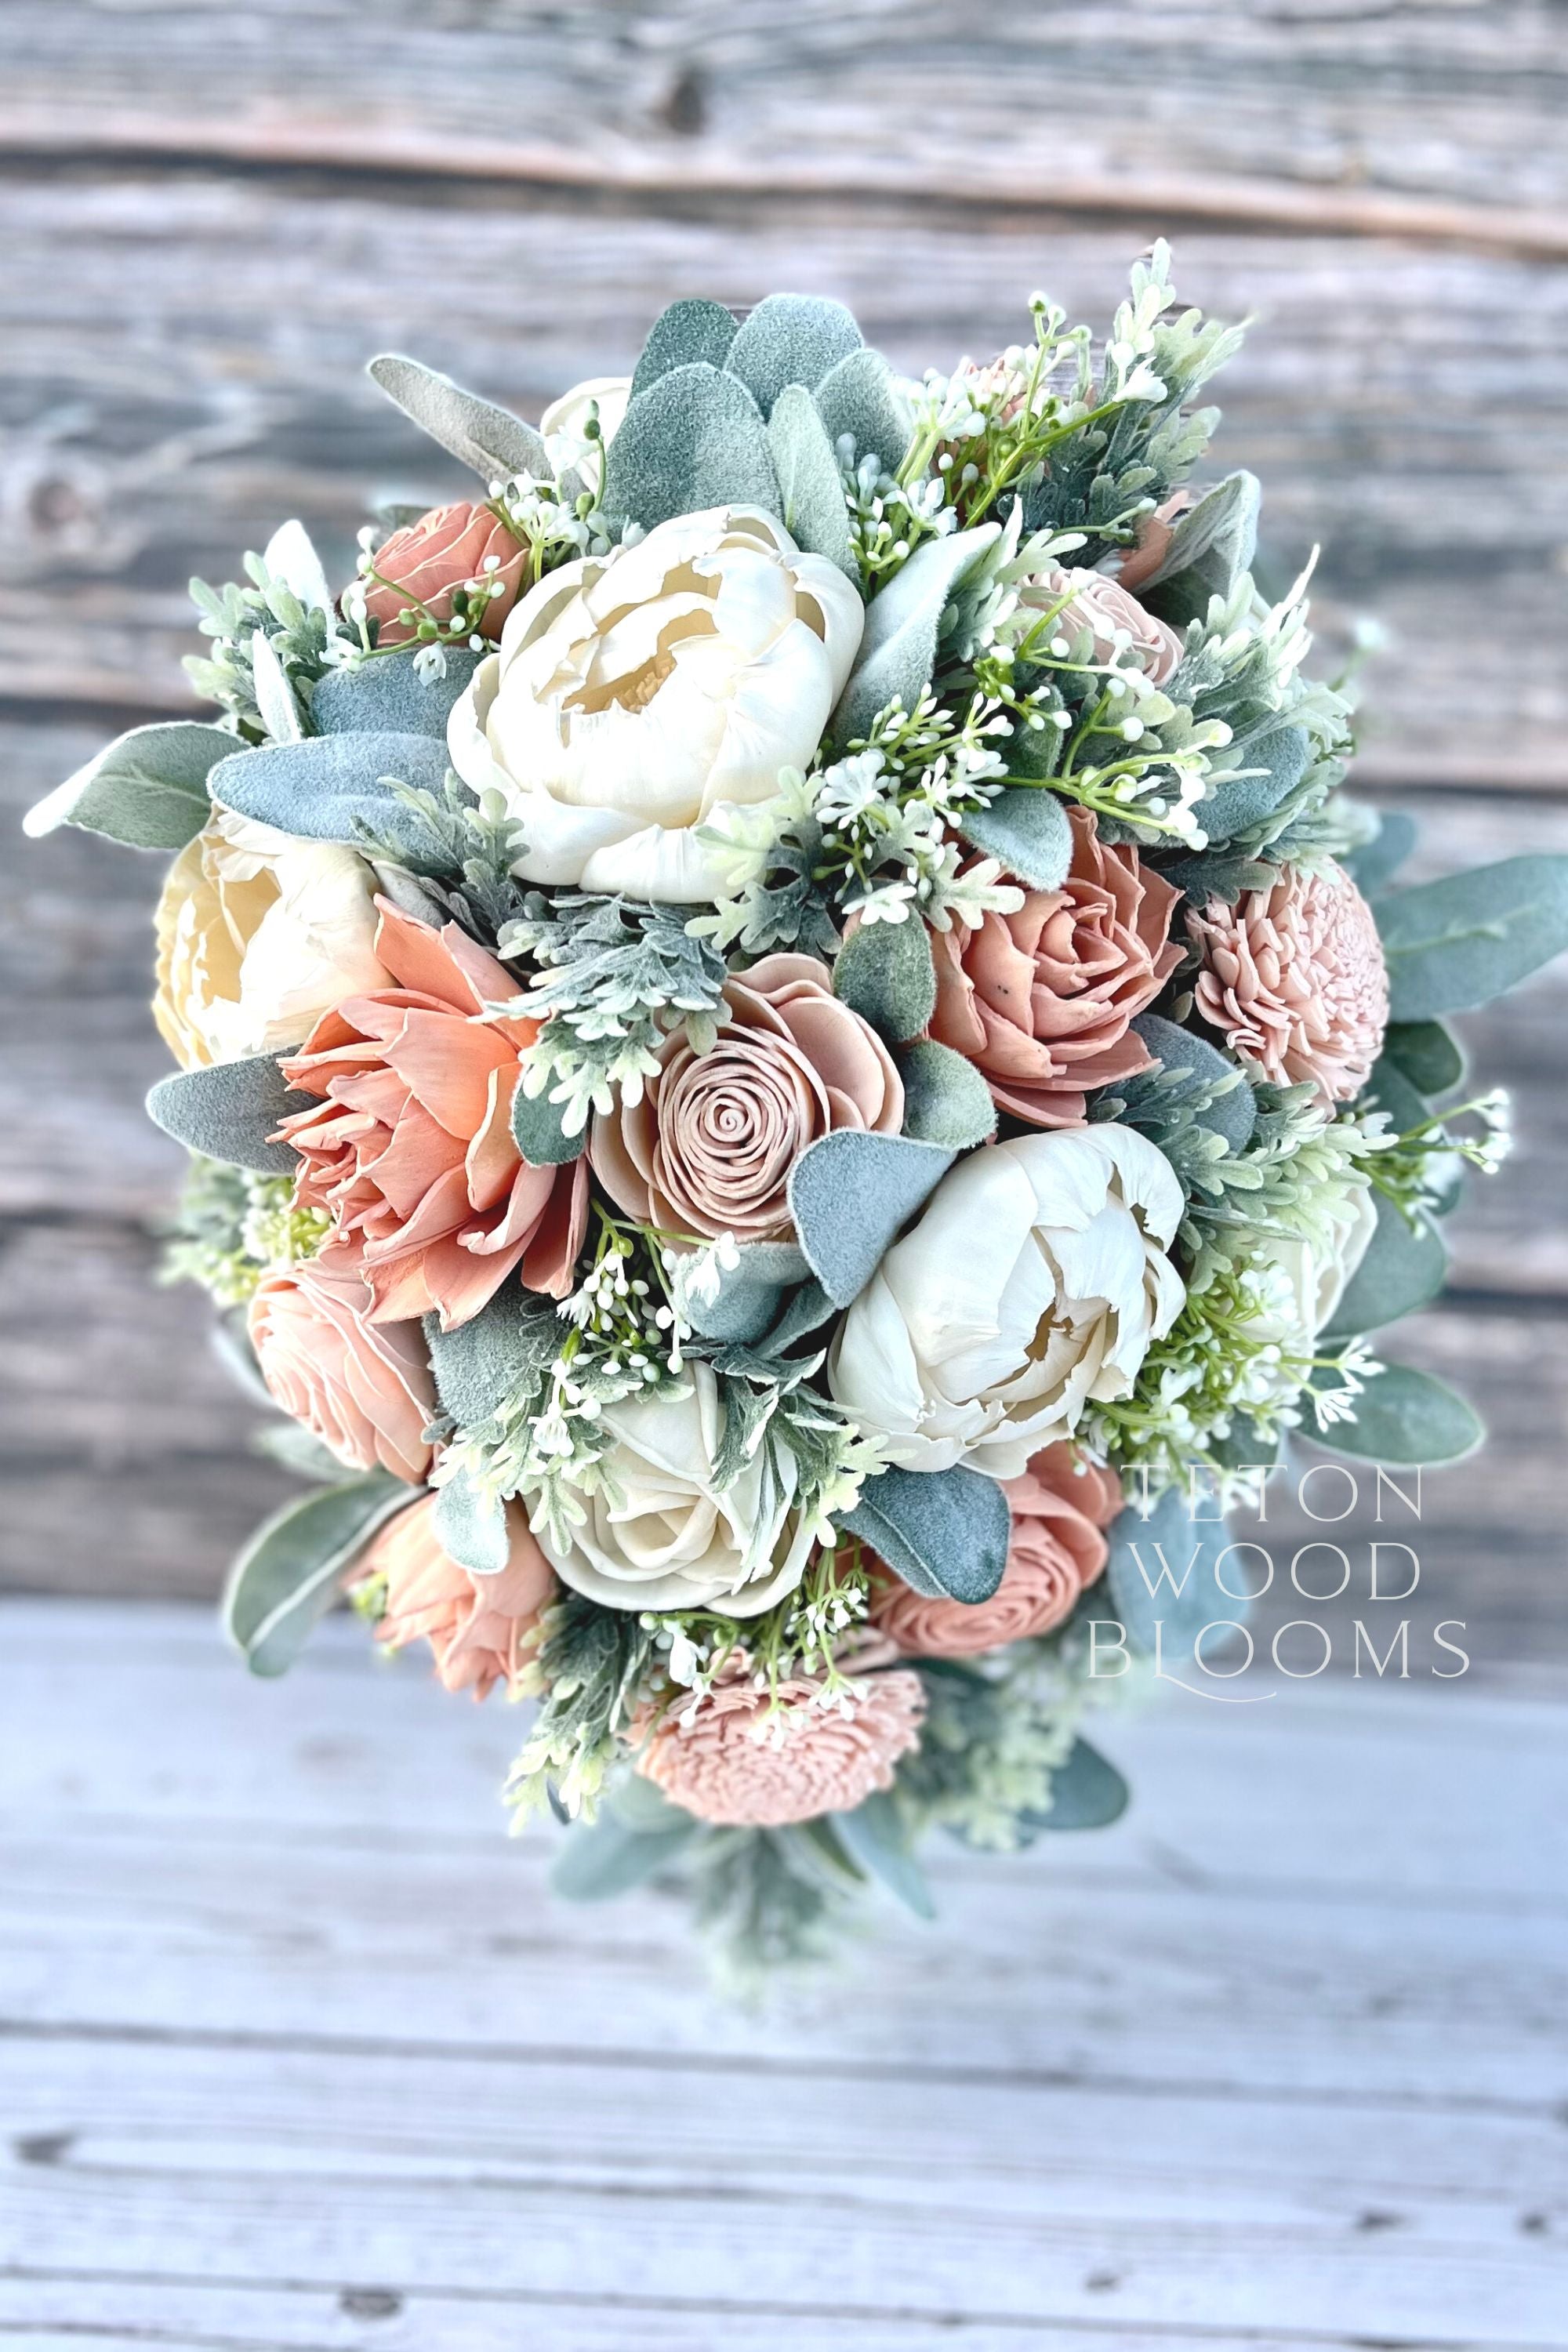 Blush Pink Bouquet - Dried Flowers Forever